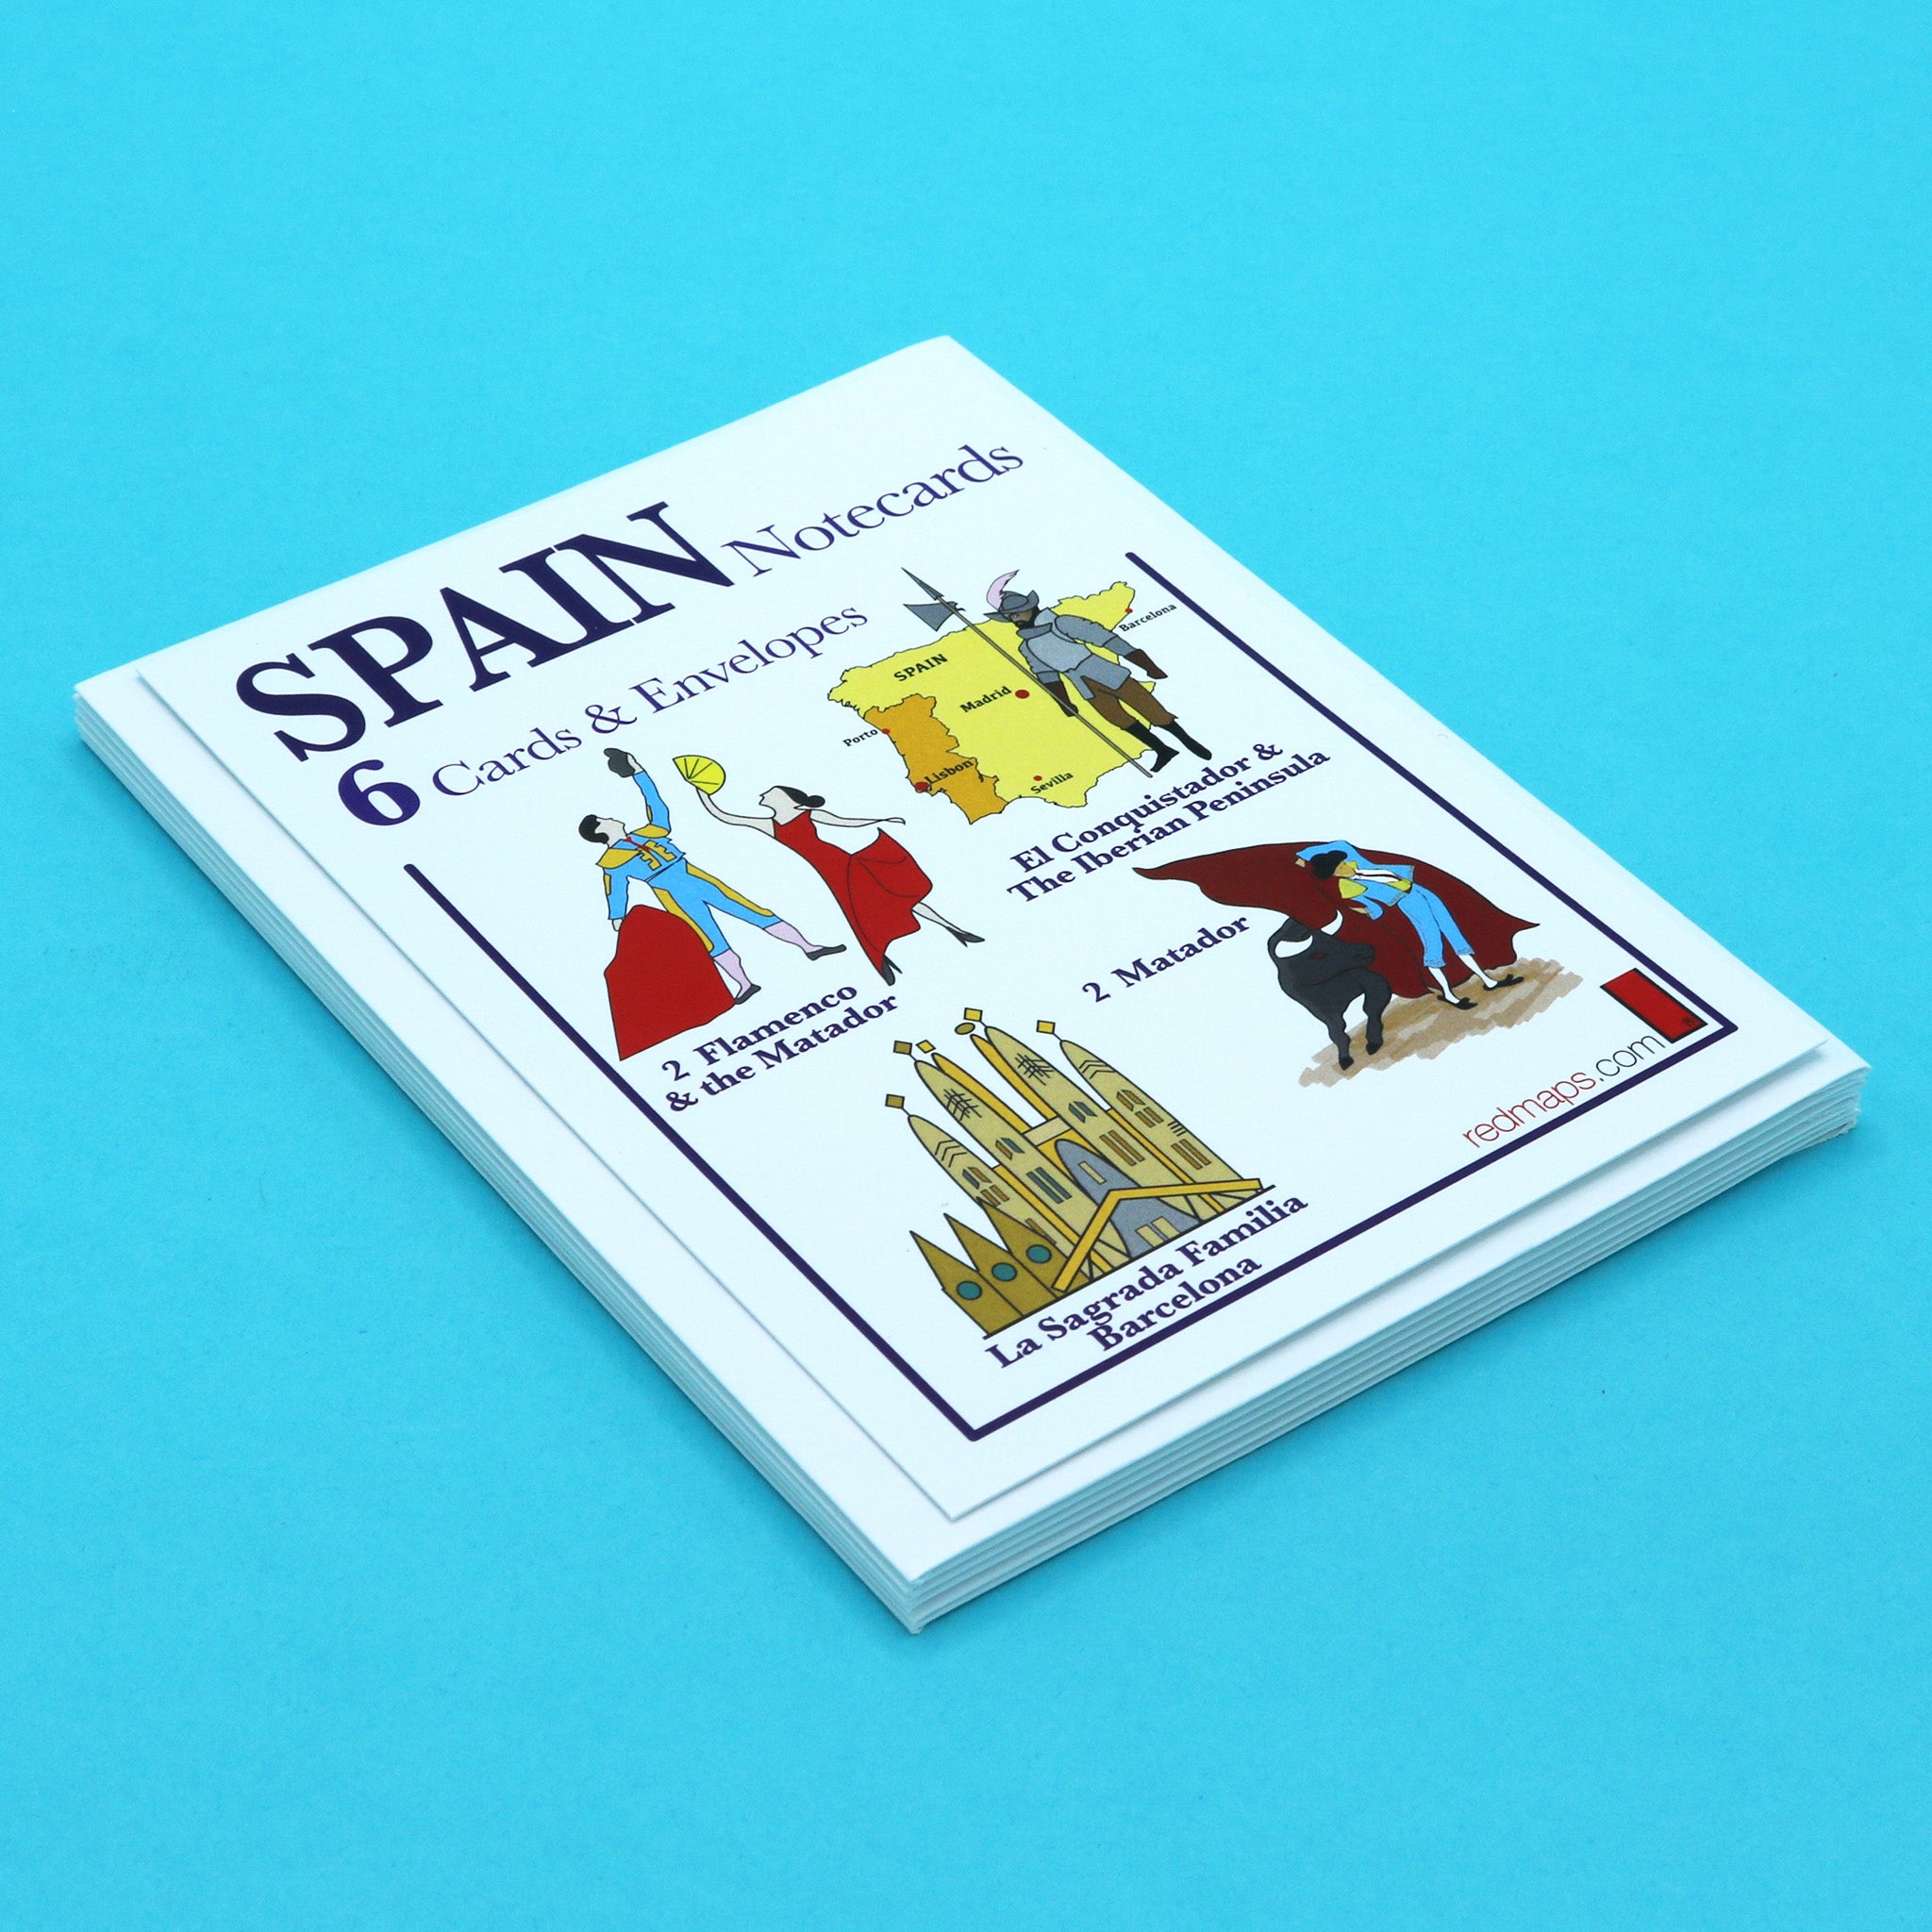 Set of notecards with illustrations of Spanish Flamenco Dancers, Matadors and Conquistadors.